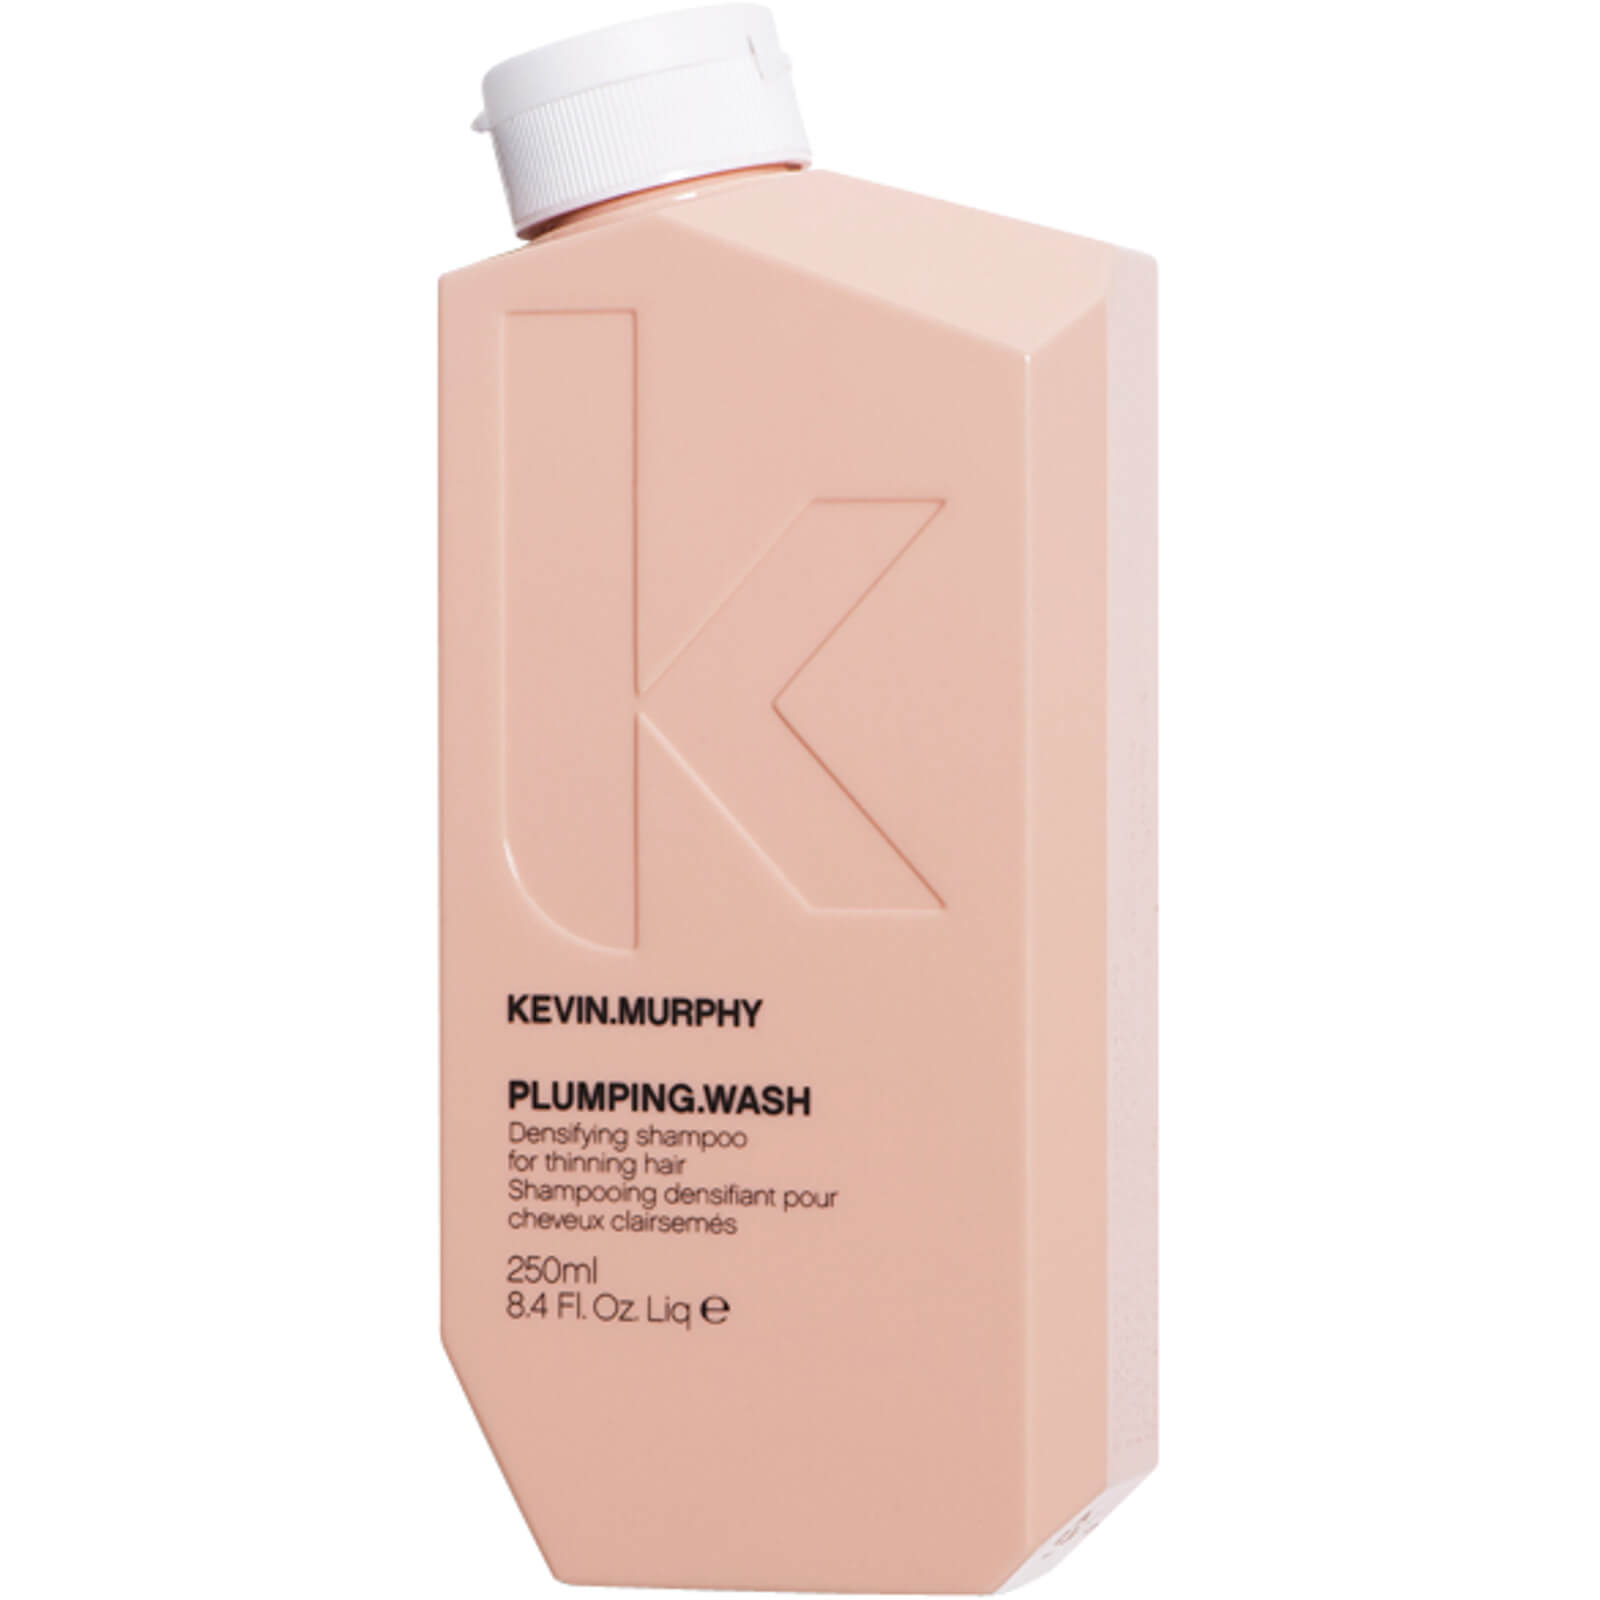 Photos - Hair Product KEVIN.MURPHY PLUMPING WASH 250ml